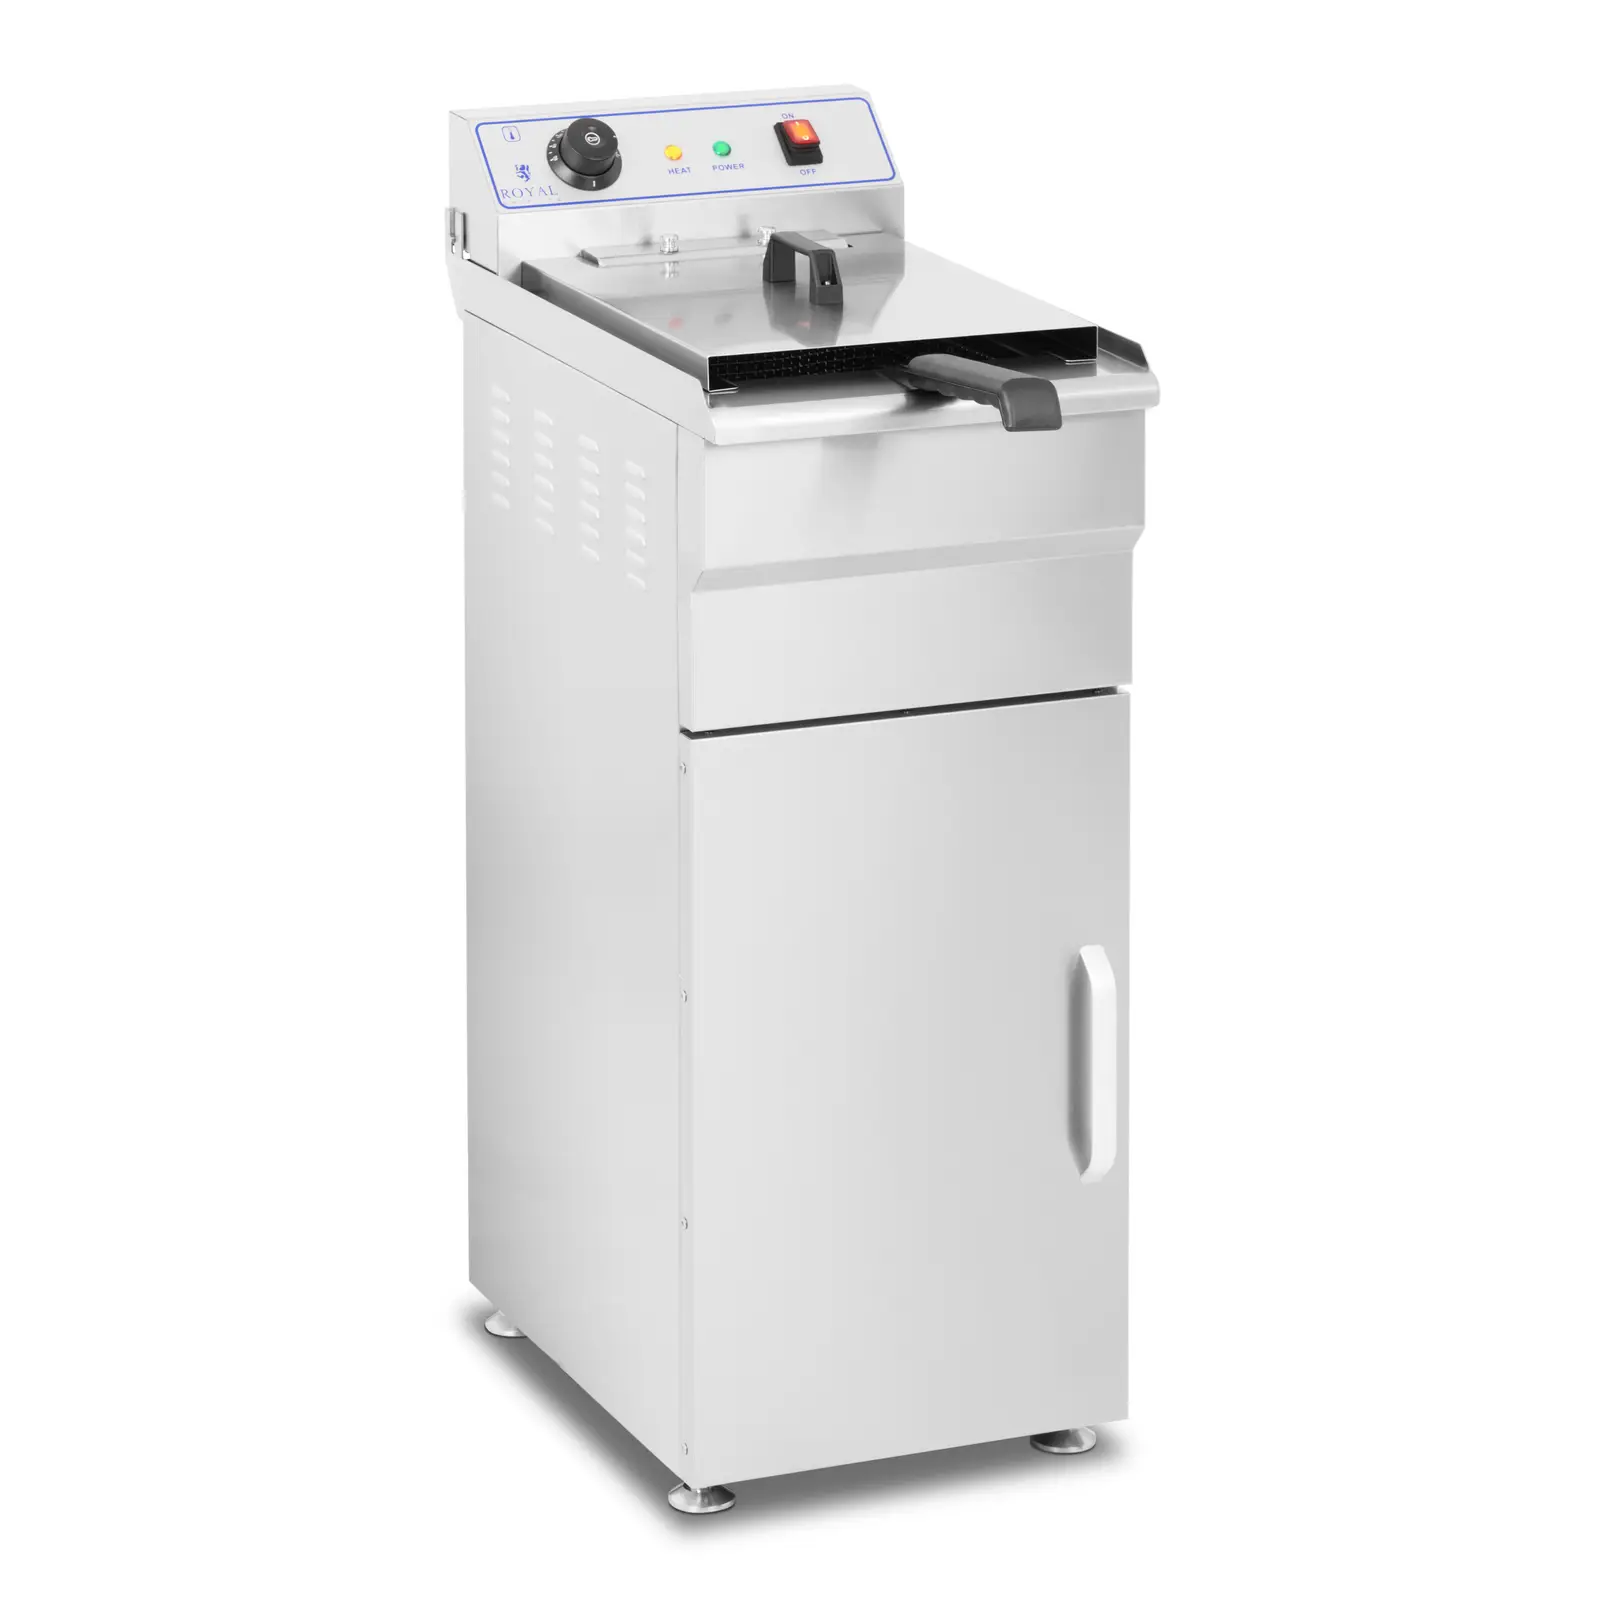 Factory second Electric Deep Fryer - 16 litres - Cabinet Base